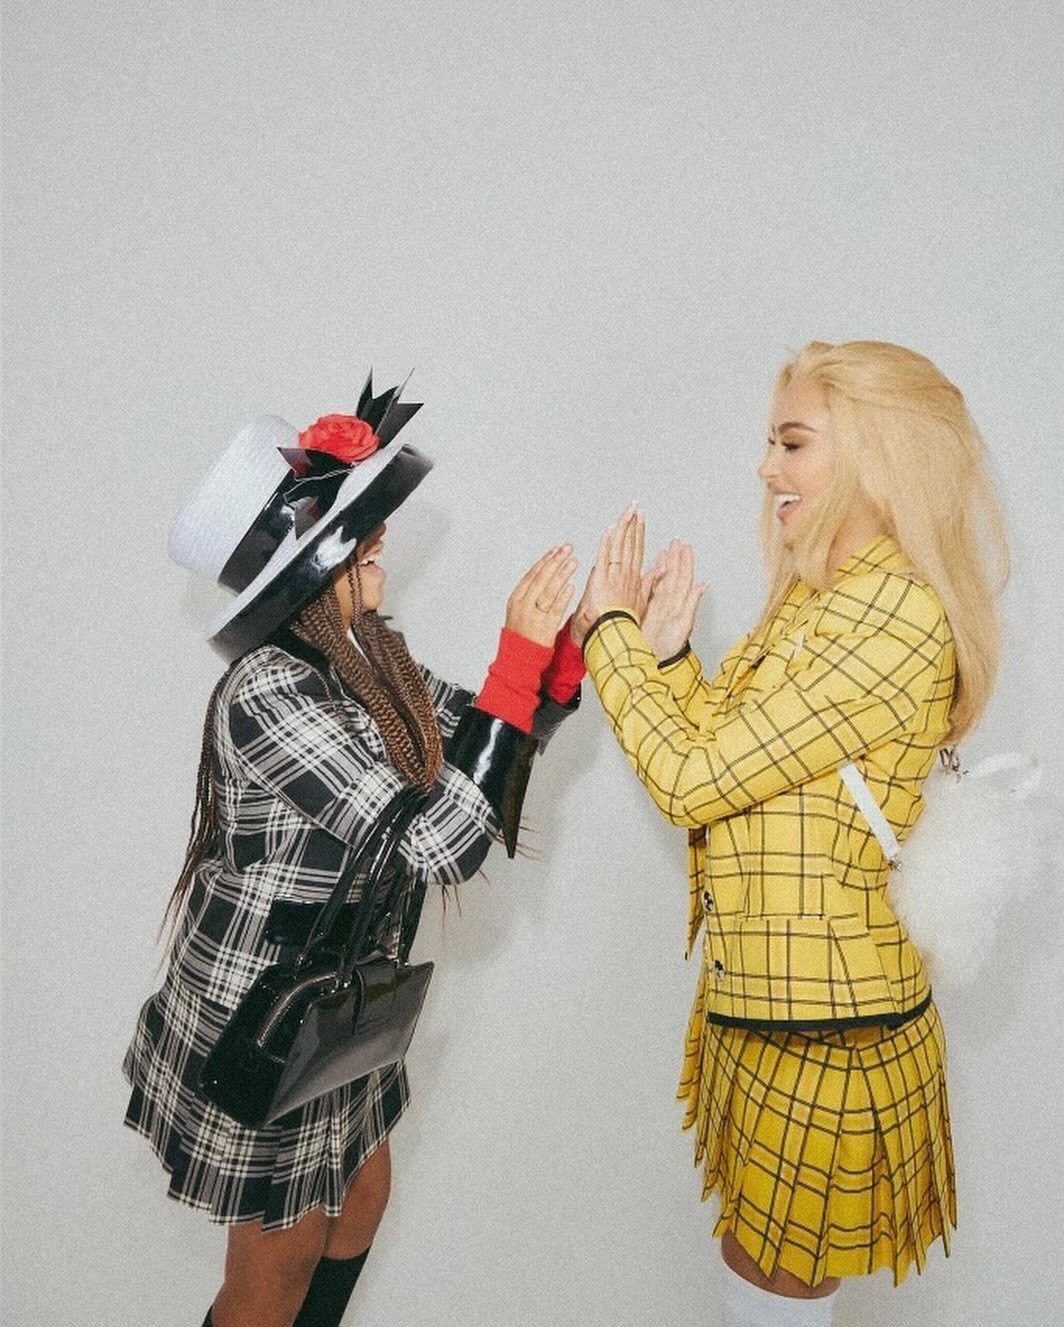 likhoa young kim kardashian with silver hair and north west suddenly shared photos recreating their favorite characters on halloween 6540d9e45e60e Young Kim Kardashian With Silver Hair And North West Suddenly Shared Photos Recreating Their Favorite Characters On Halloween 2023.